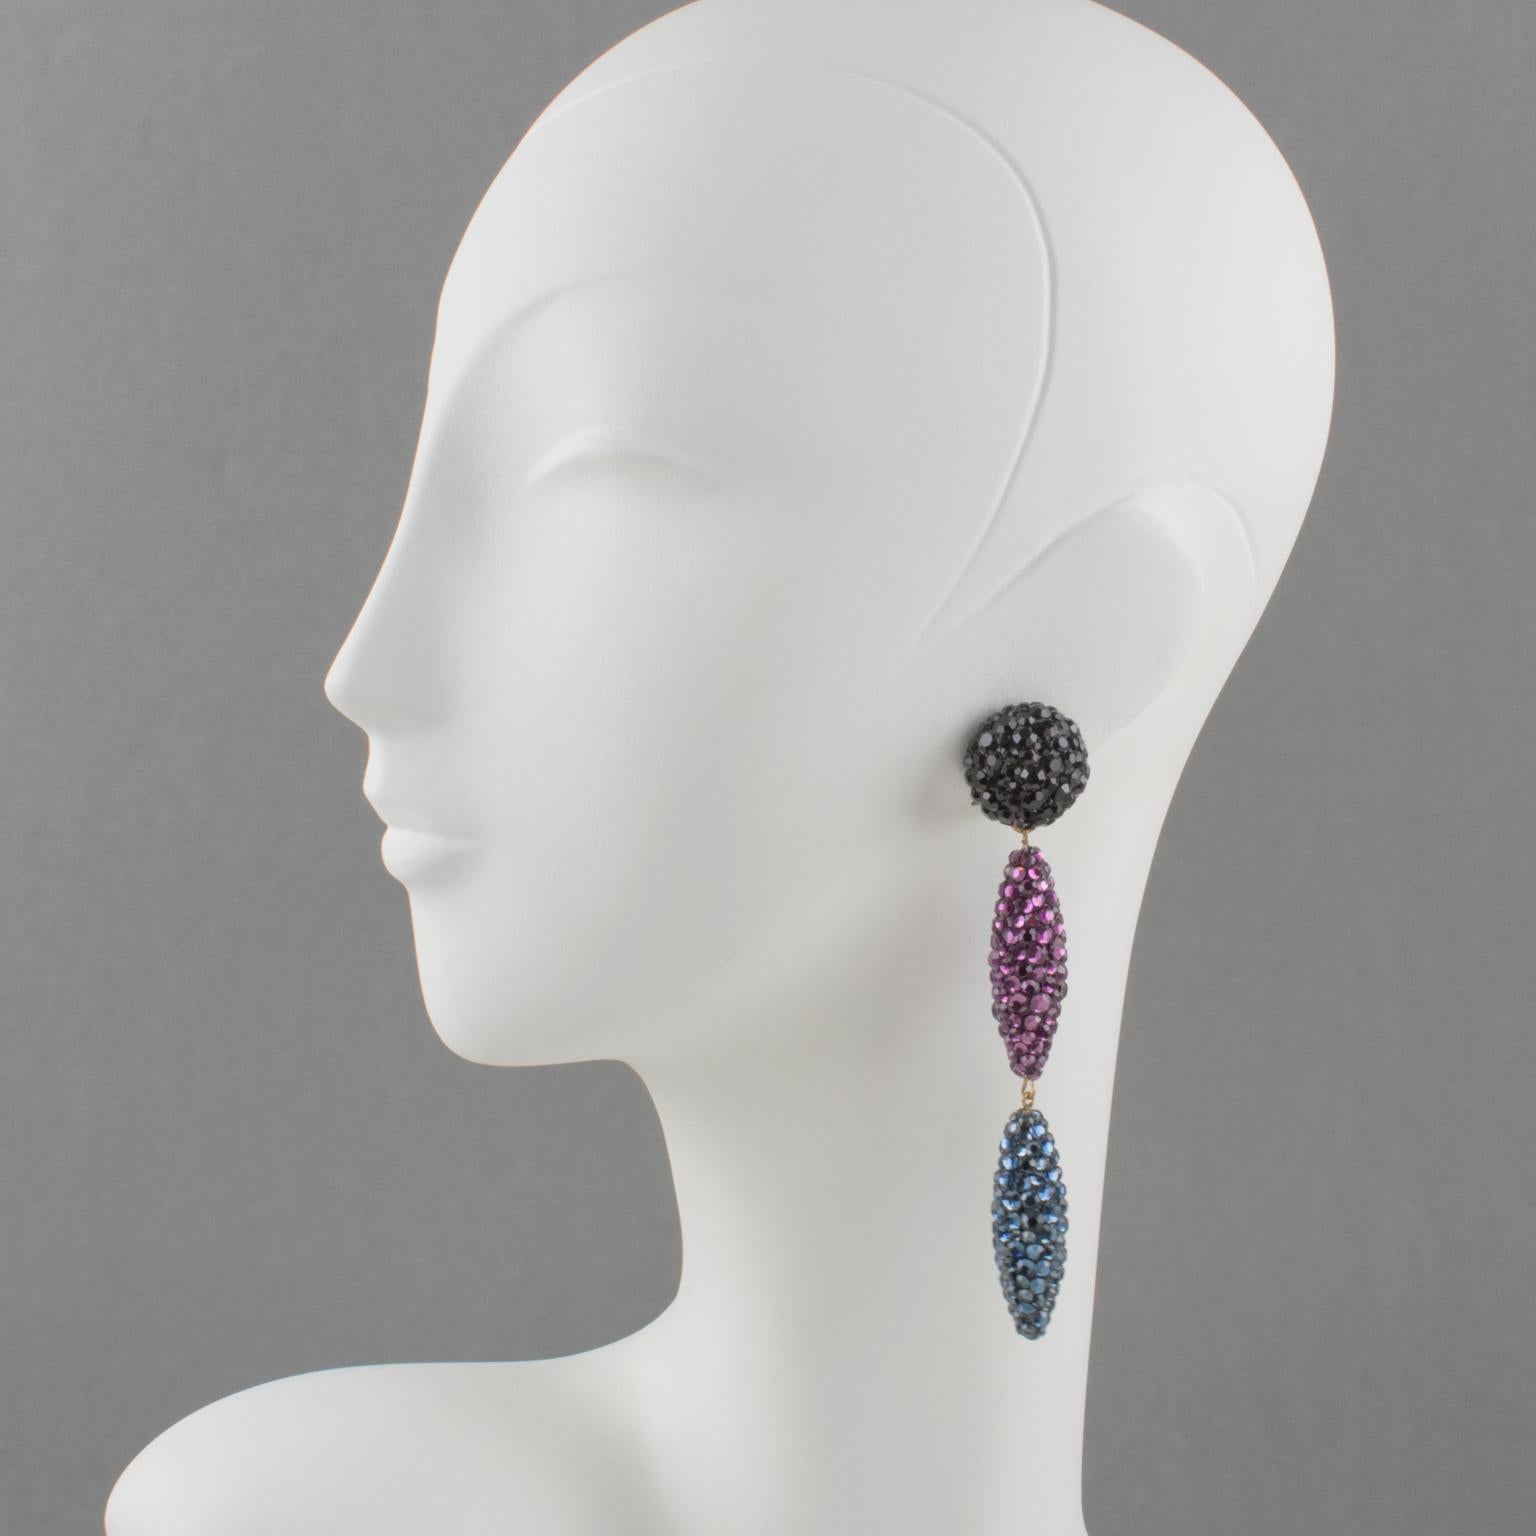 Sophisticated statement clip-on earrings designed by Richard Kerr in the 1980s. They are made up of his signature pave rhinestones. Featuring dangle extra-long drop shape all covered with crystal rhinestones. Assorted colors of licorice black,